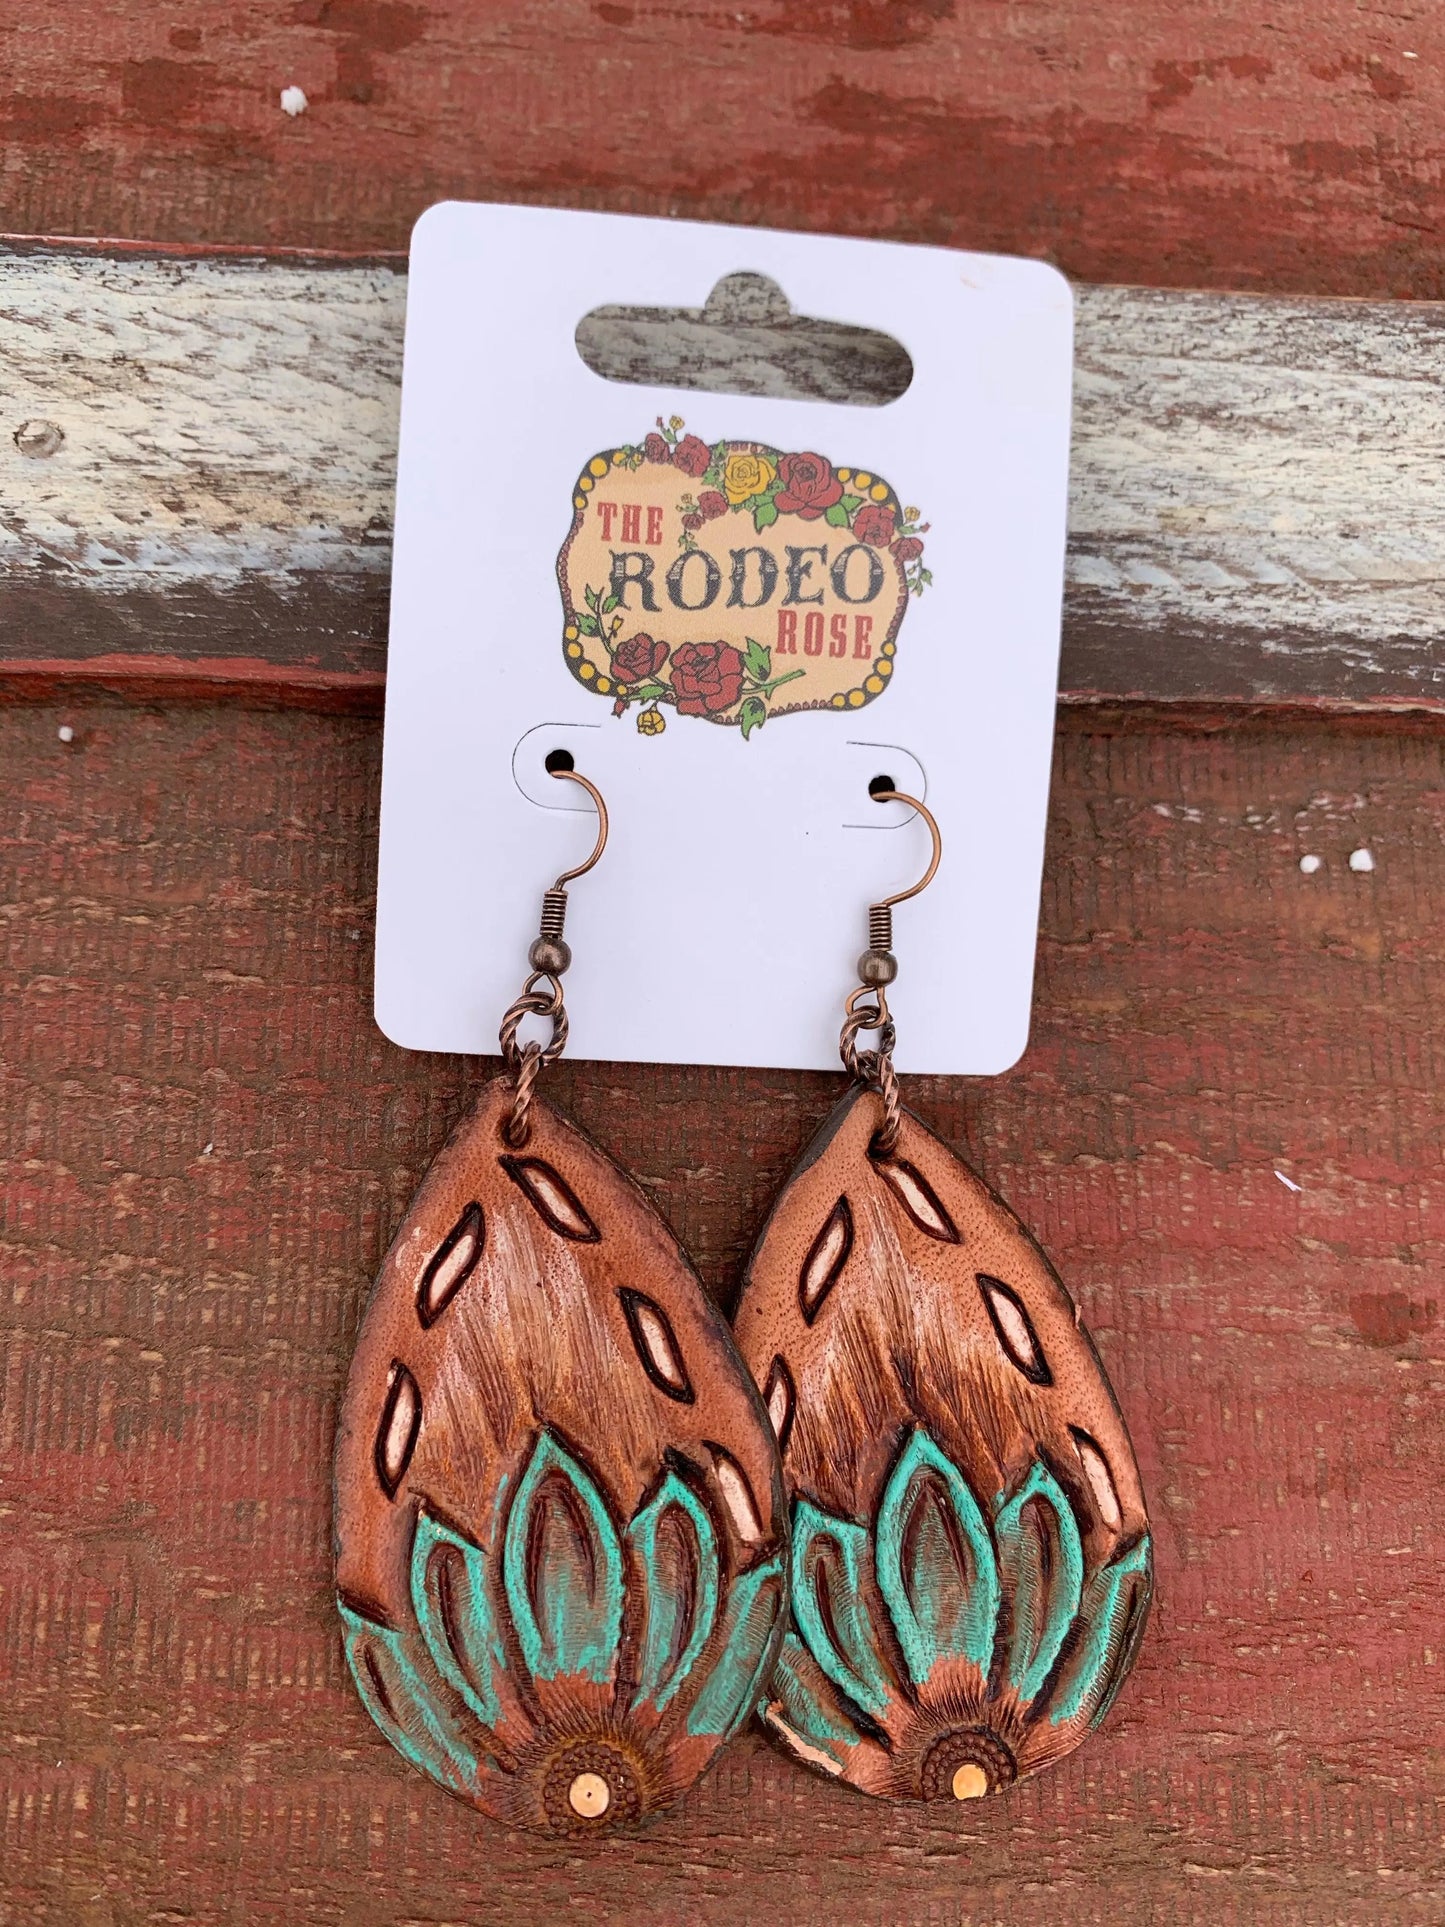 The Tad Hand tooled Leather Earring with Buckstitch Border The Rodeo Rose